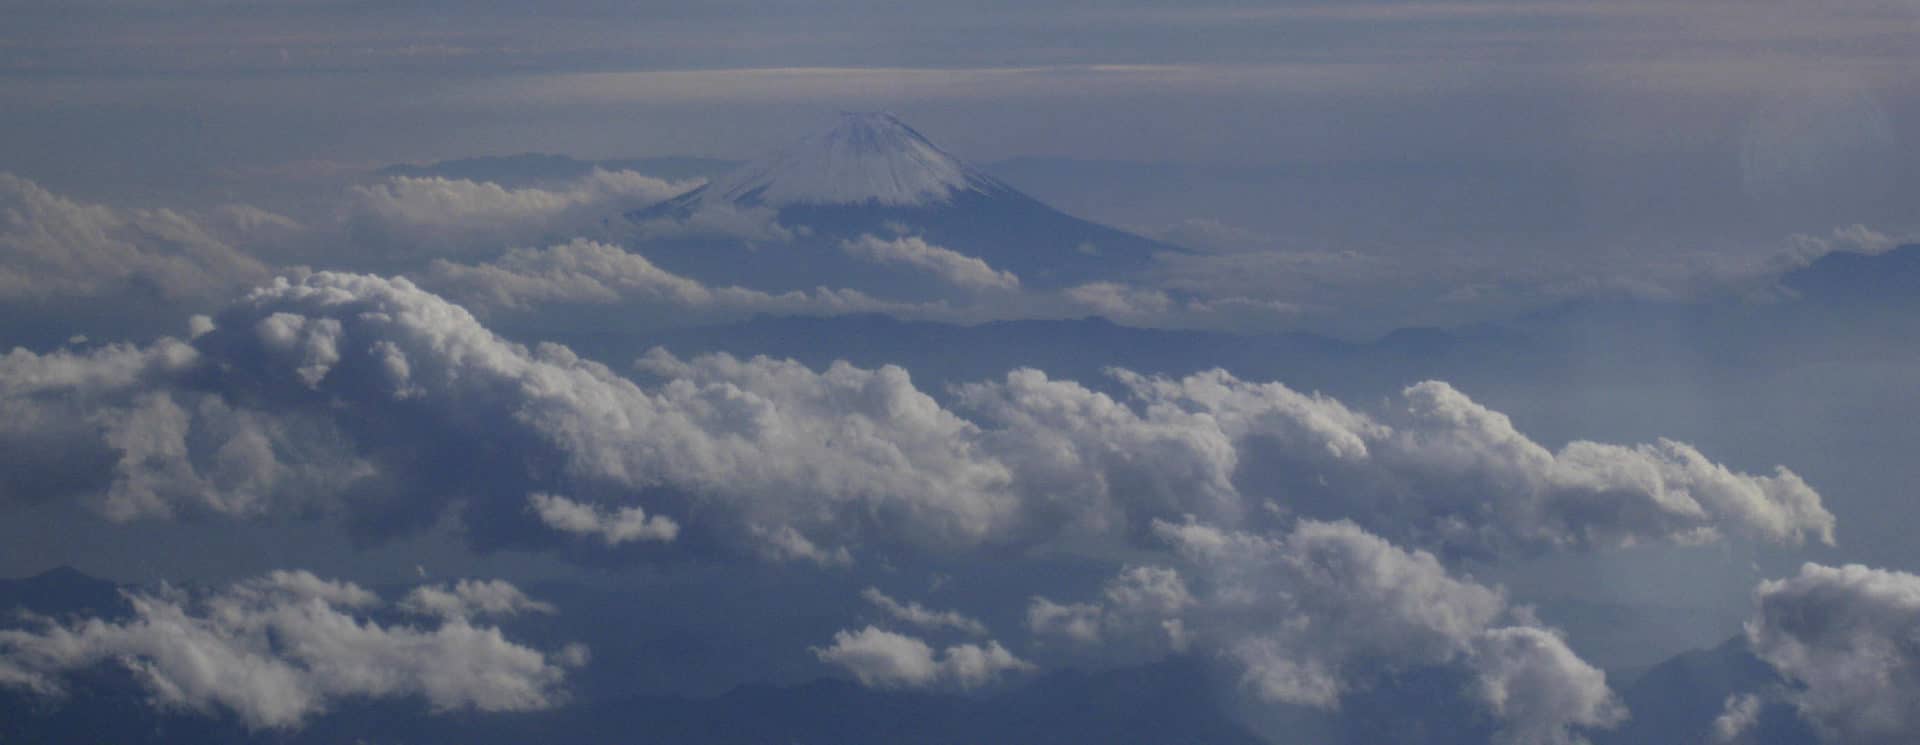 Fuji from the plane.